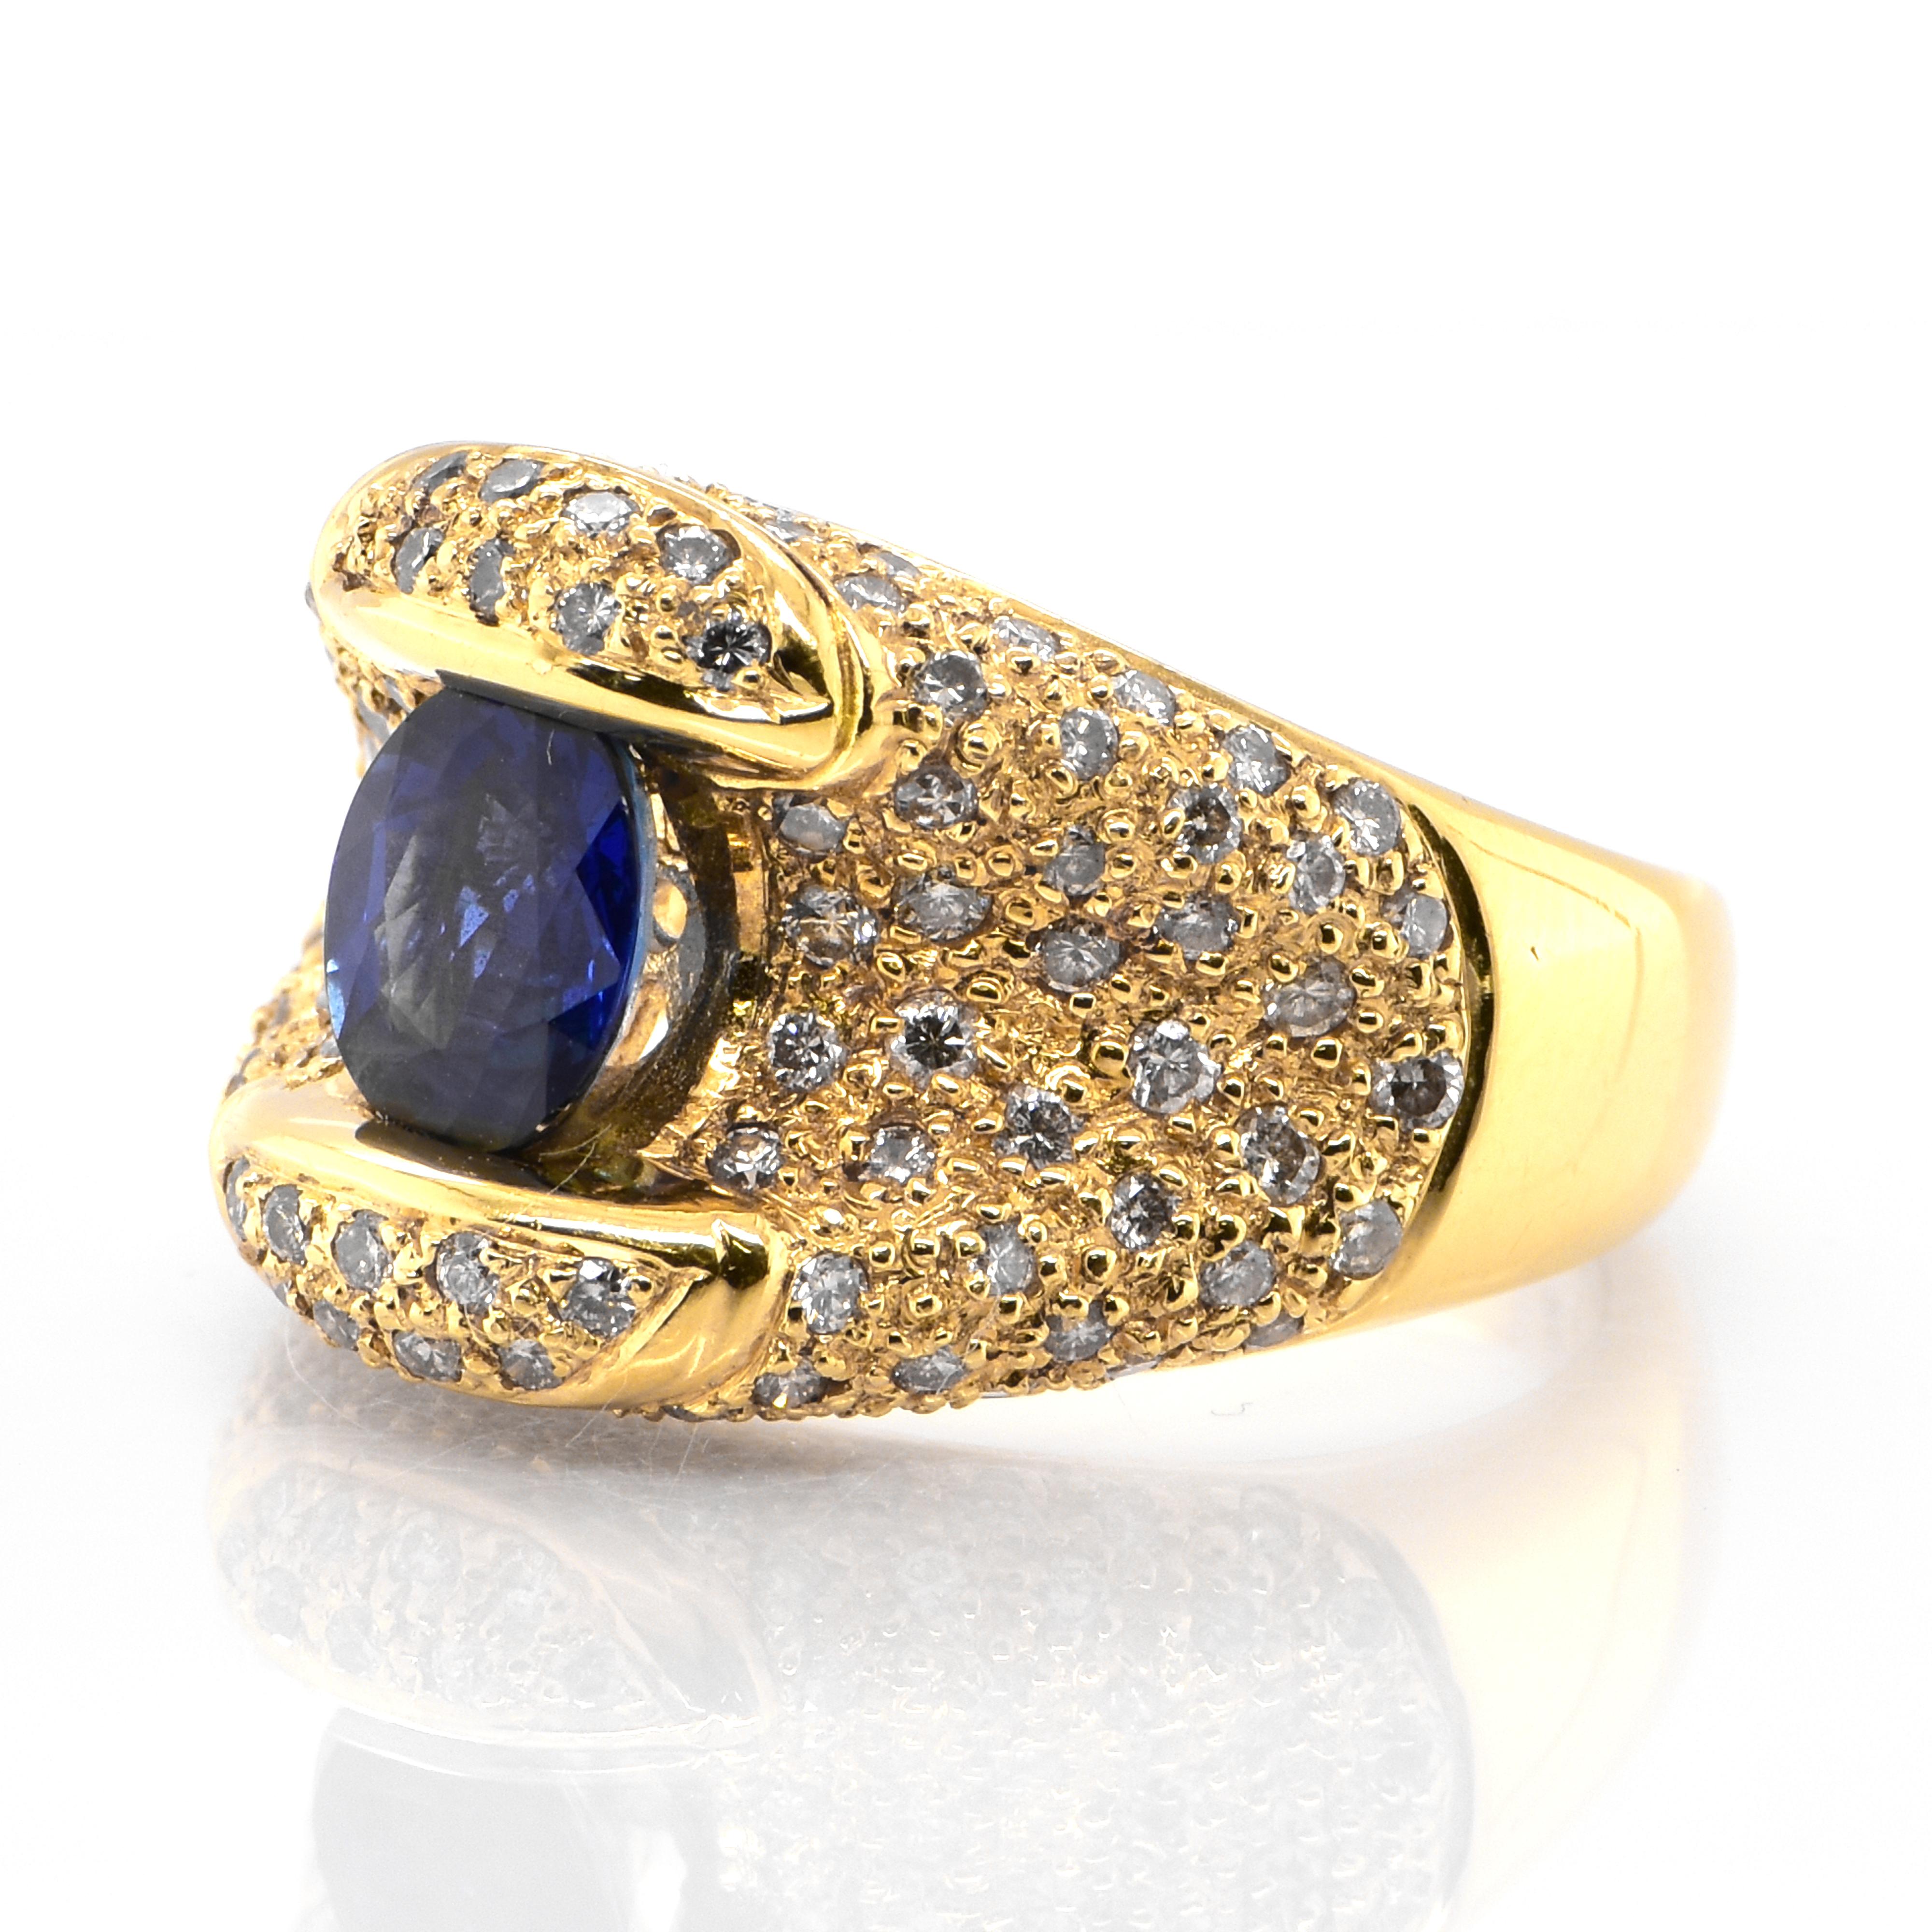 A beautiful ring featuring 1.27 Carat Natural Blue Sapphire and 1.00 Carats Diamond Accents set in 18 Karat Yellow Gold. Sapphires have extraordinary durability - they excel in hardness as well as toughness and durability making them very popular in